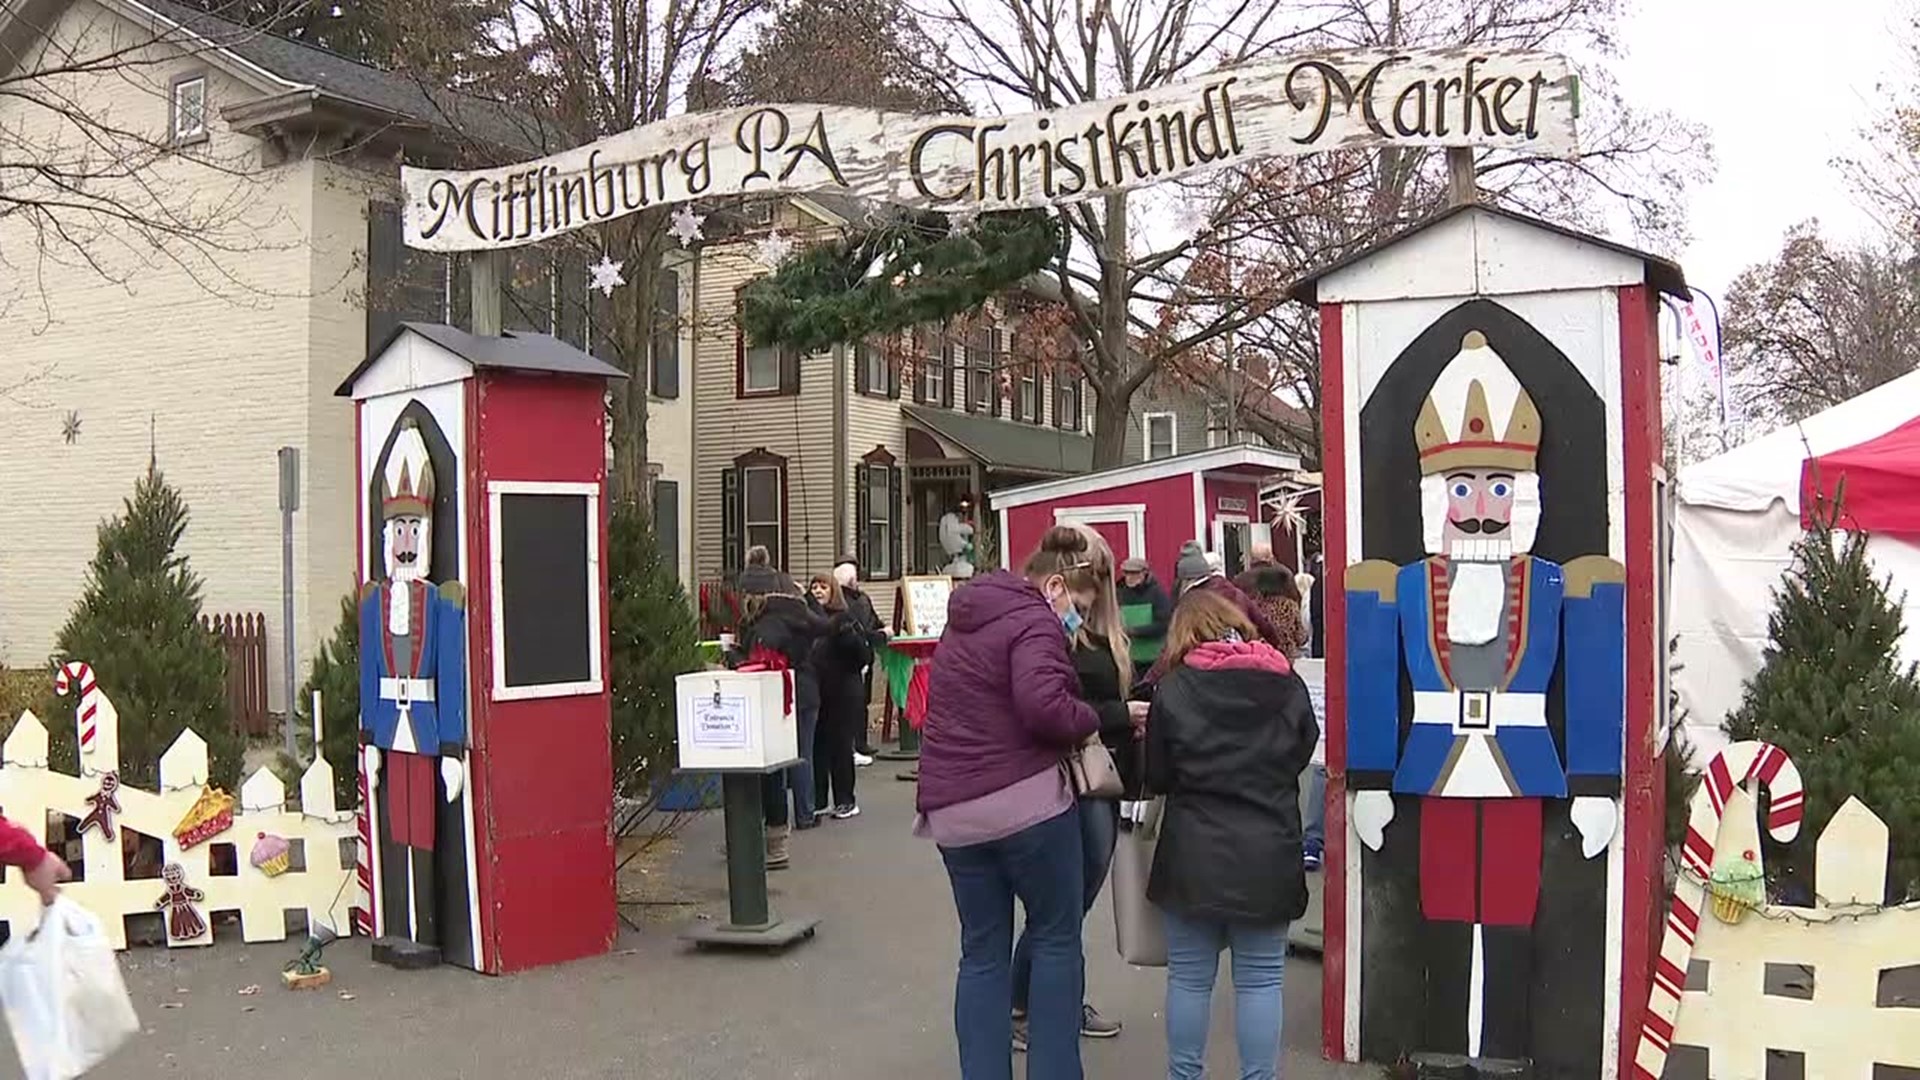 A longtime Christmas tradition is back in Mifflinburg after taking a year off because of the pandemic.